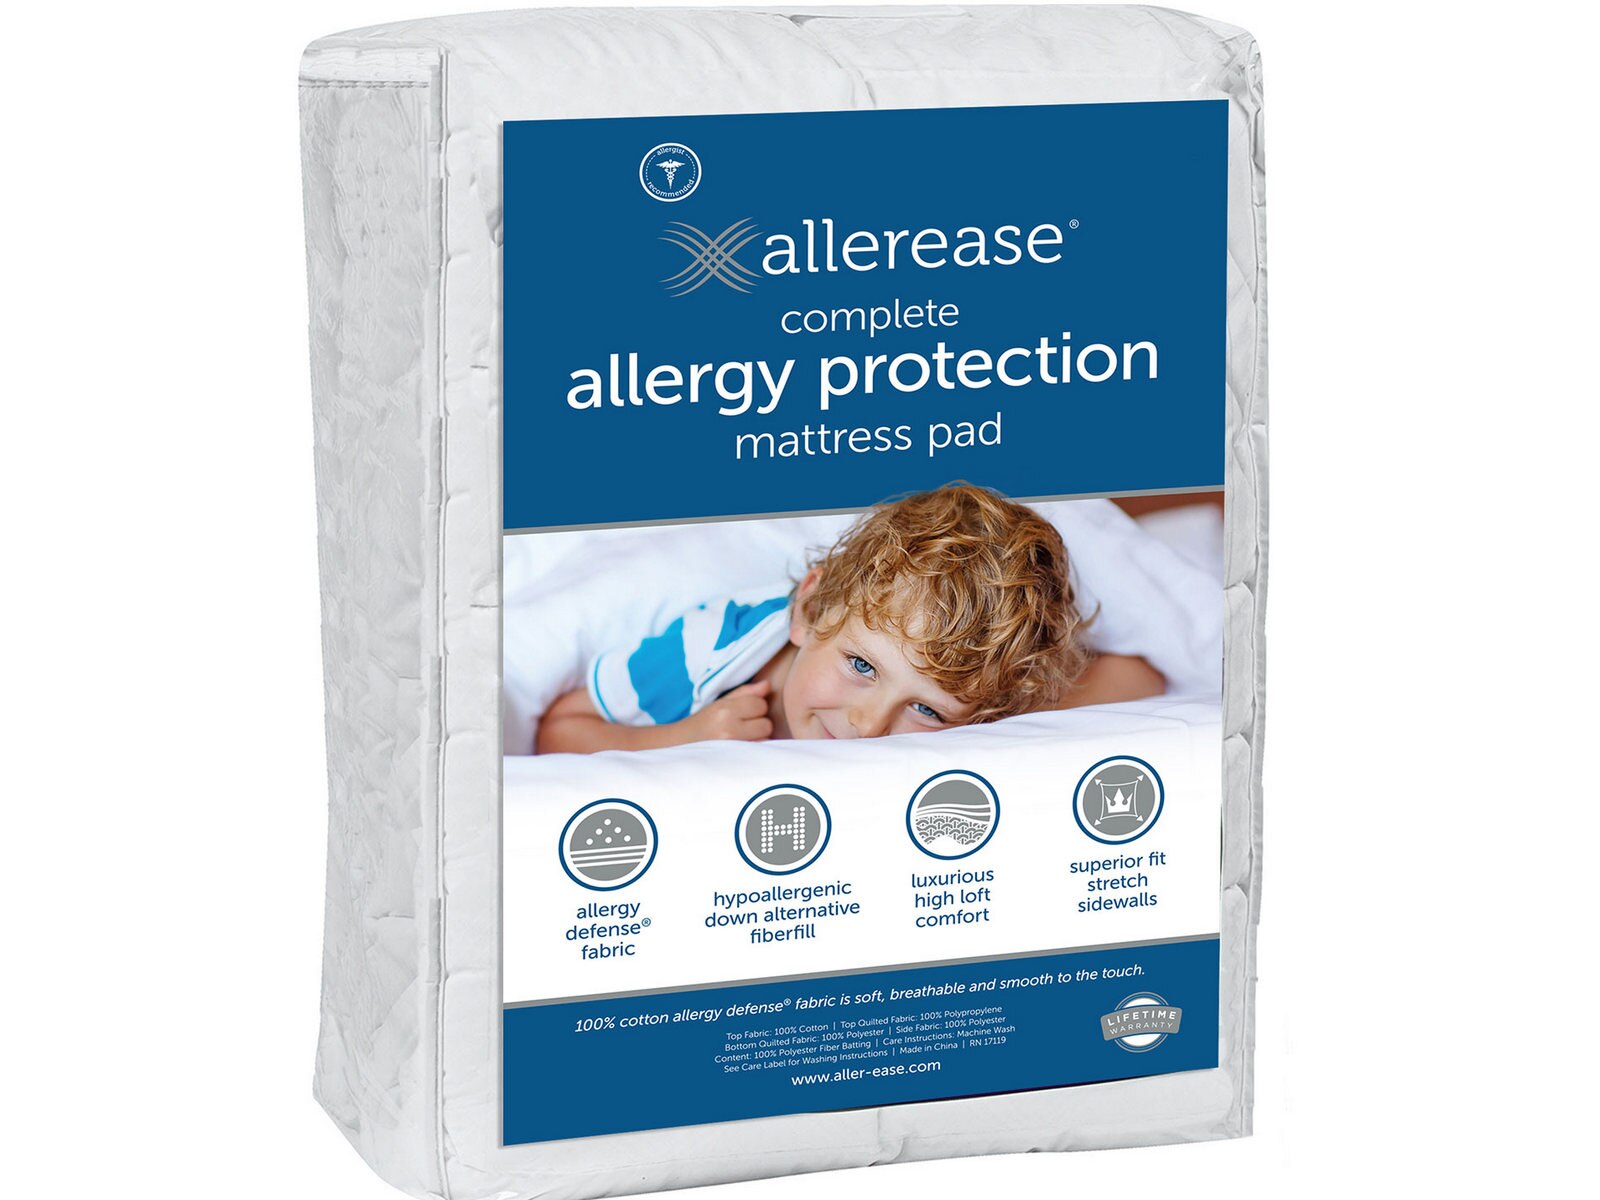 allerease complete allergy protection mattress pad